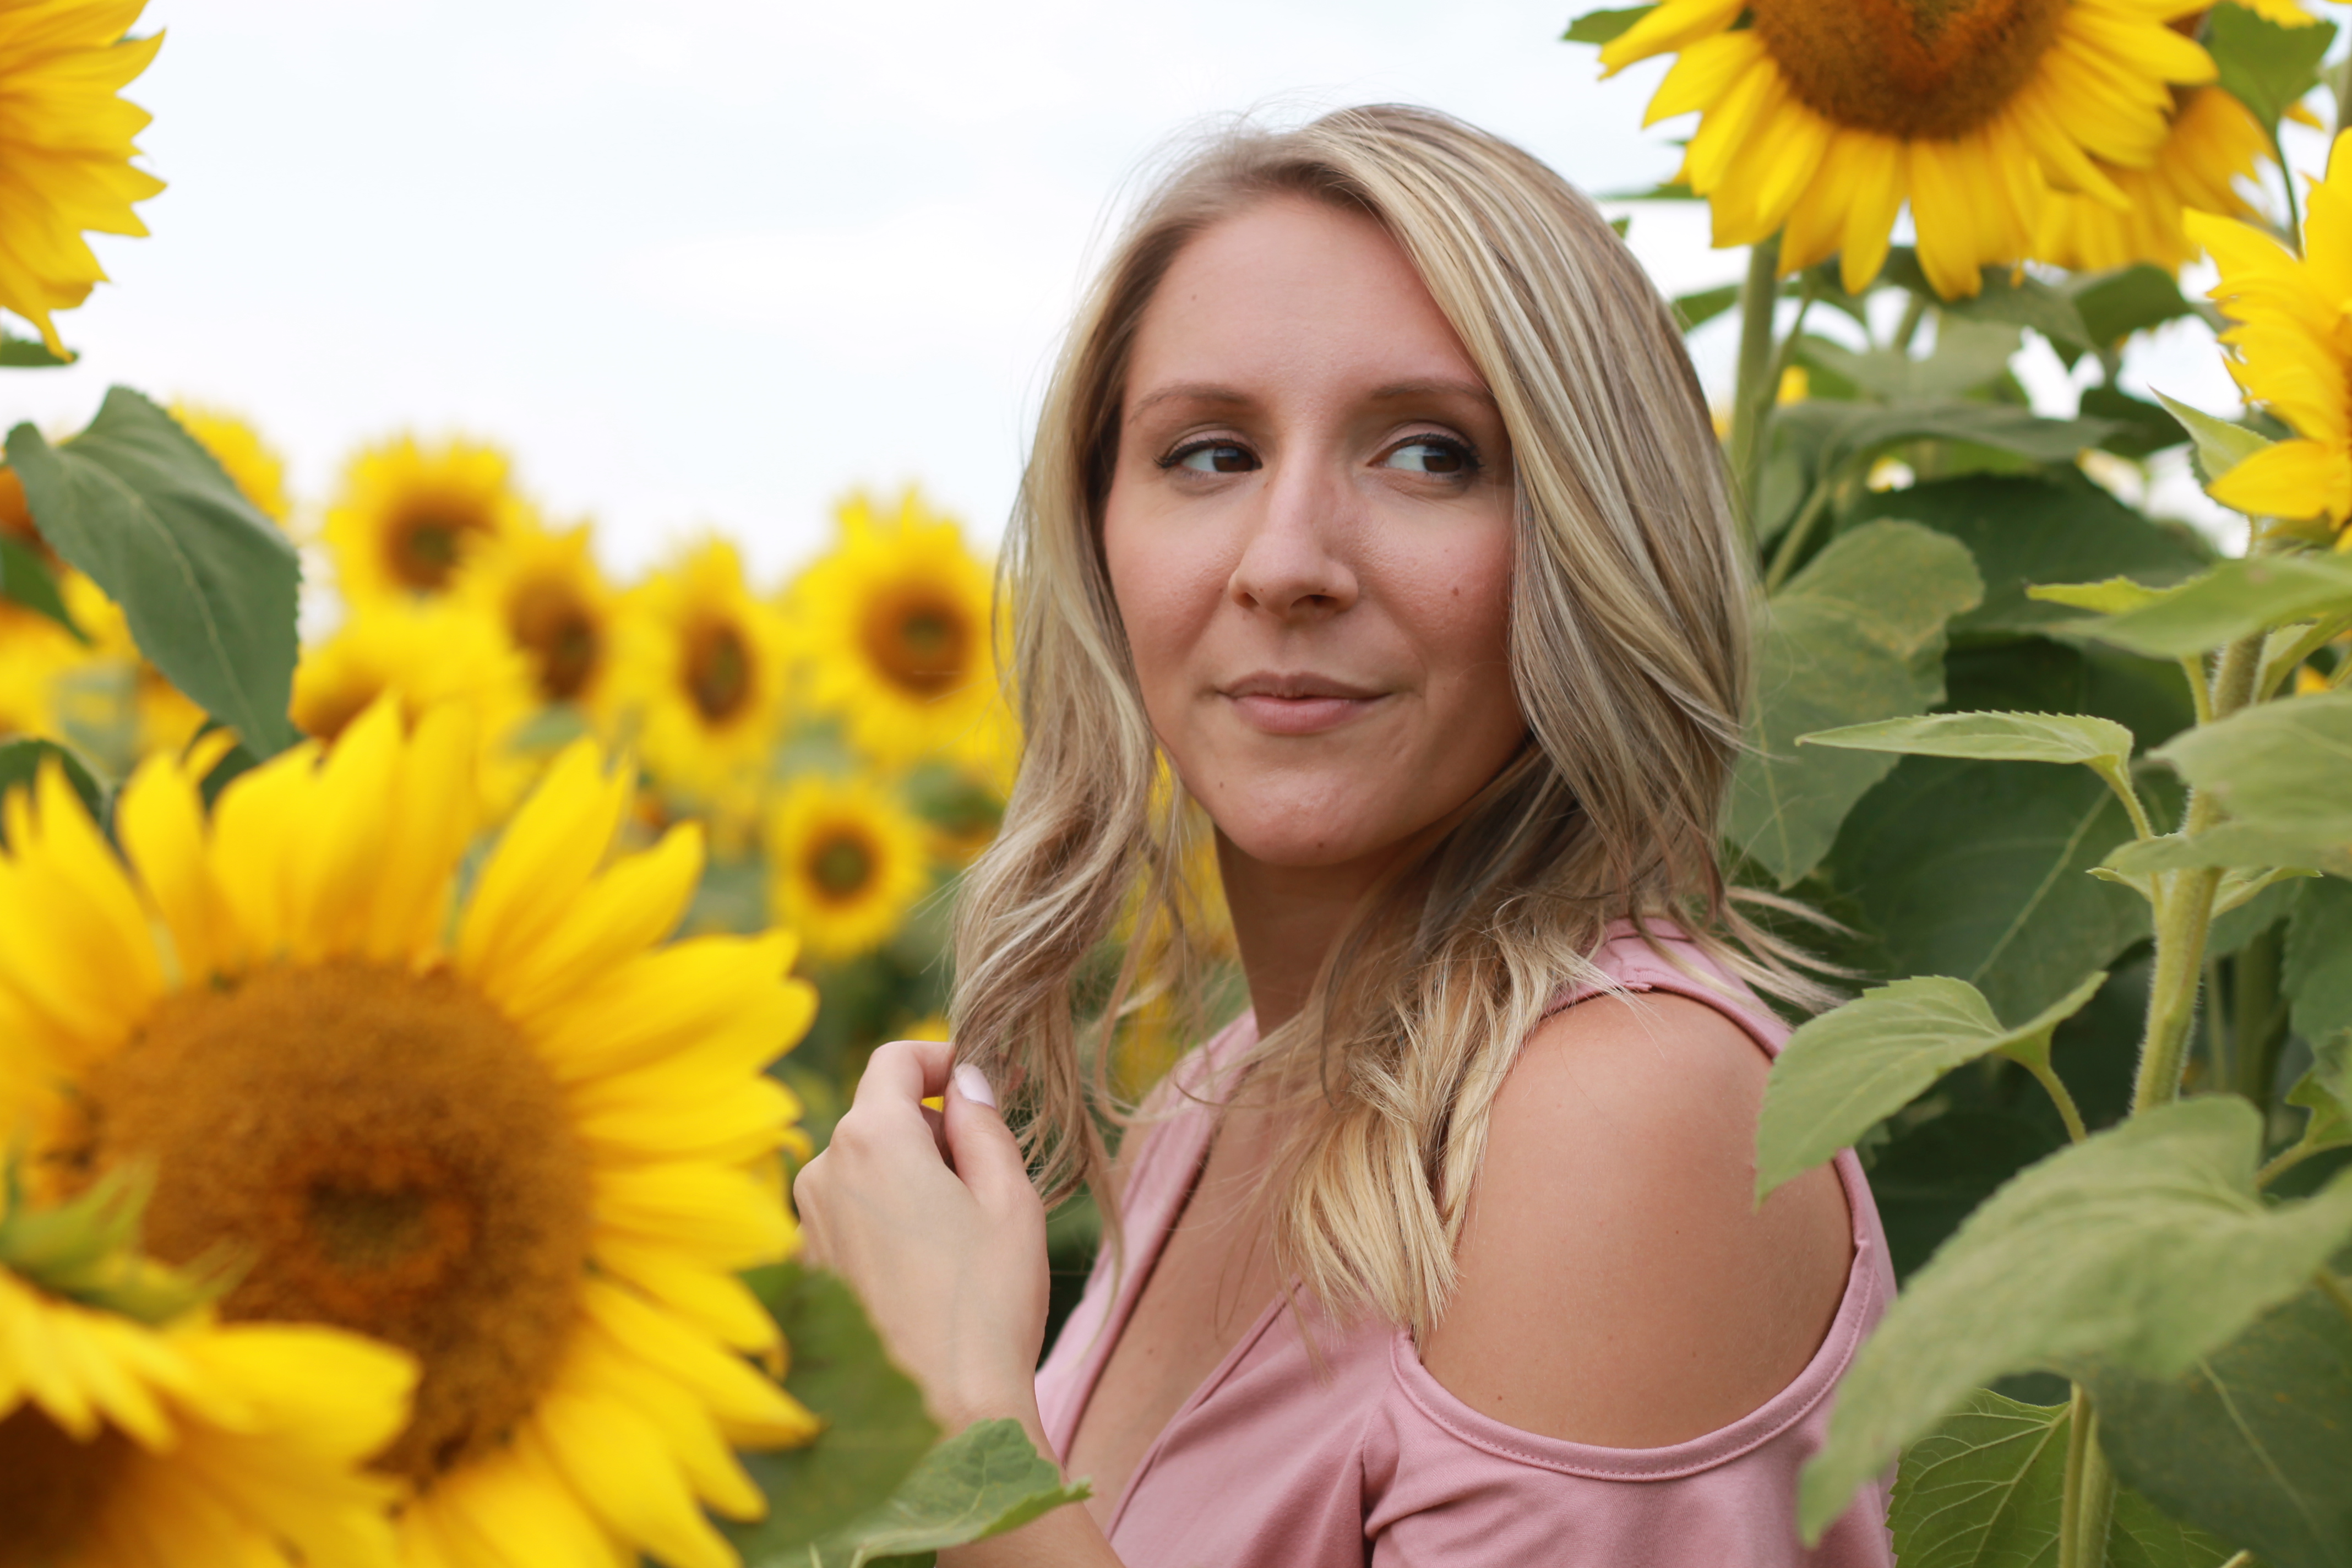 Sunflowers at Colby Farmstand | Maternity photoshoot | Our Little Home Style